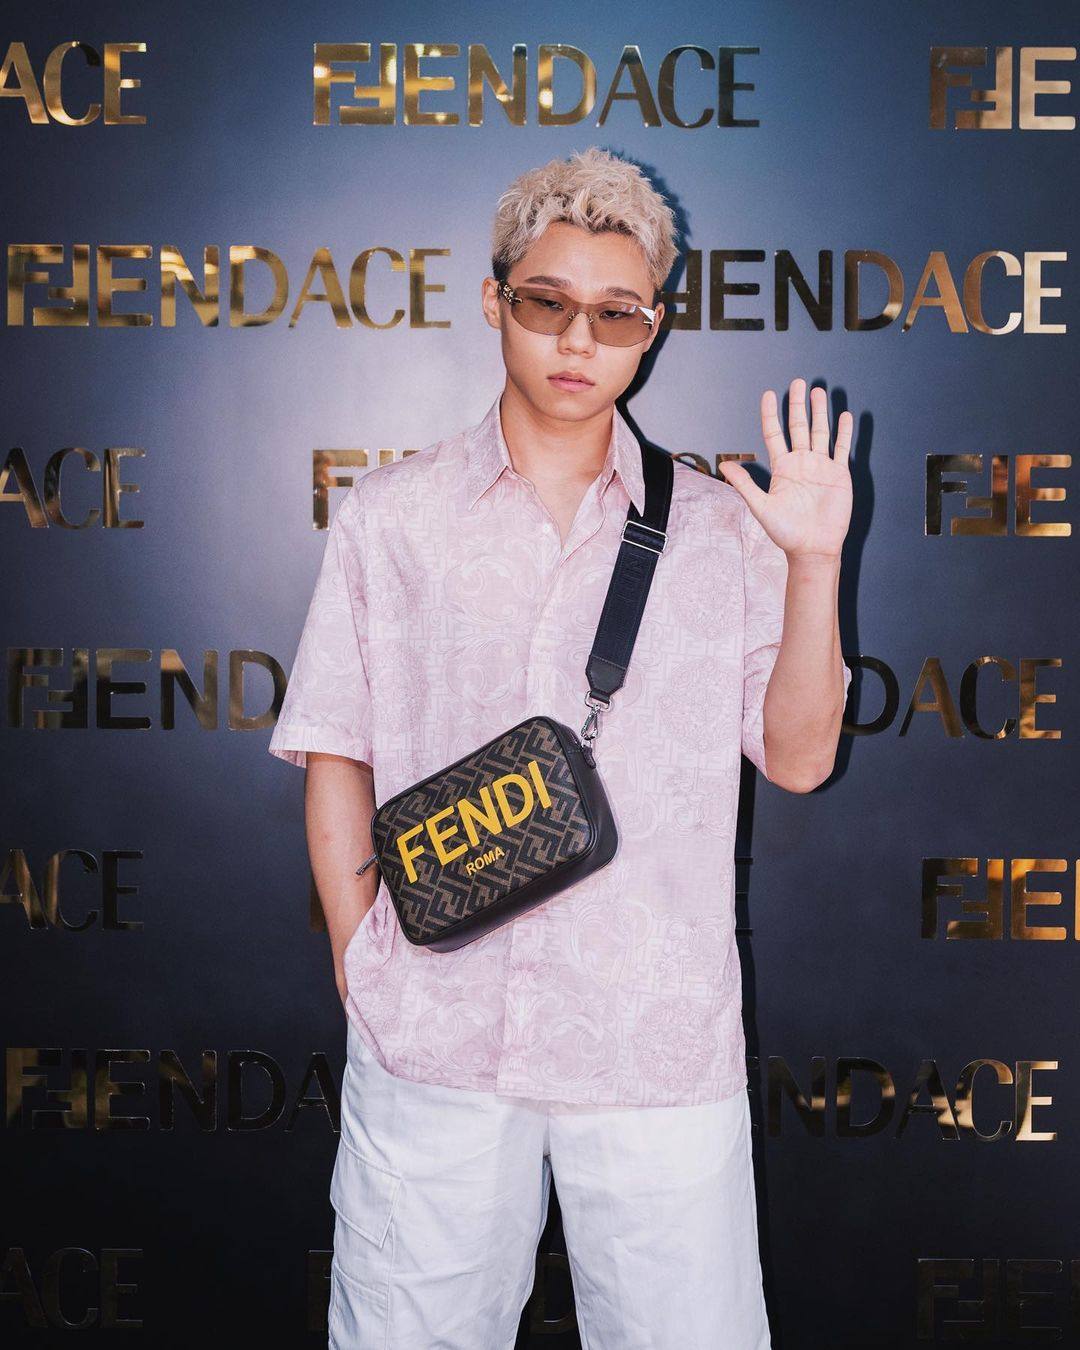 Gareth Tong at a Fendace event in Harbour City, Hong Kong, in May 2022. Photo: @gareth_tong/Instagram